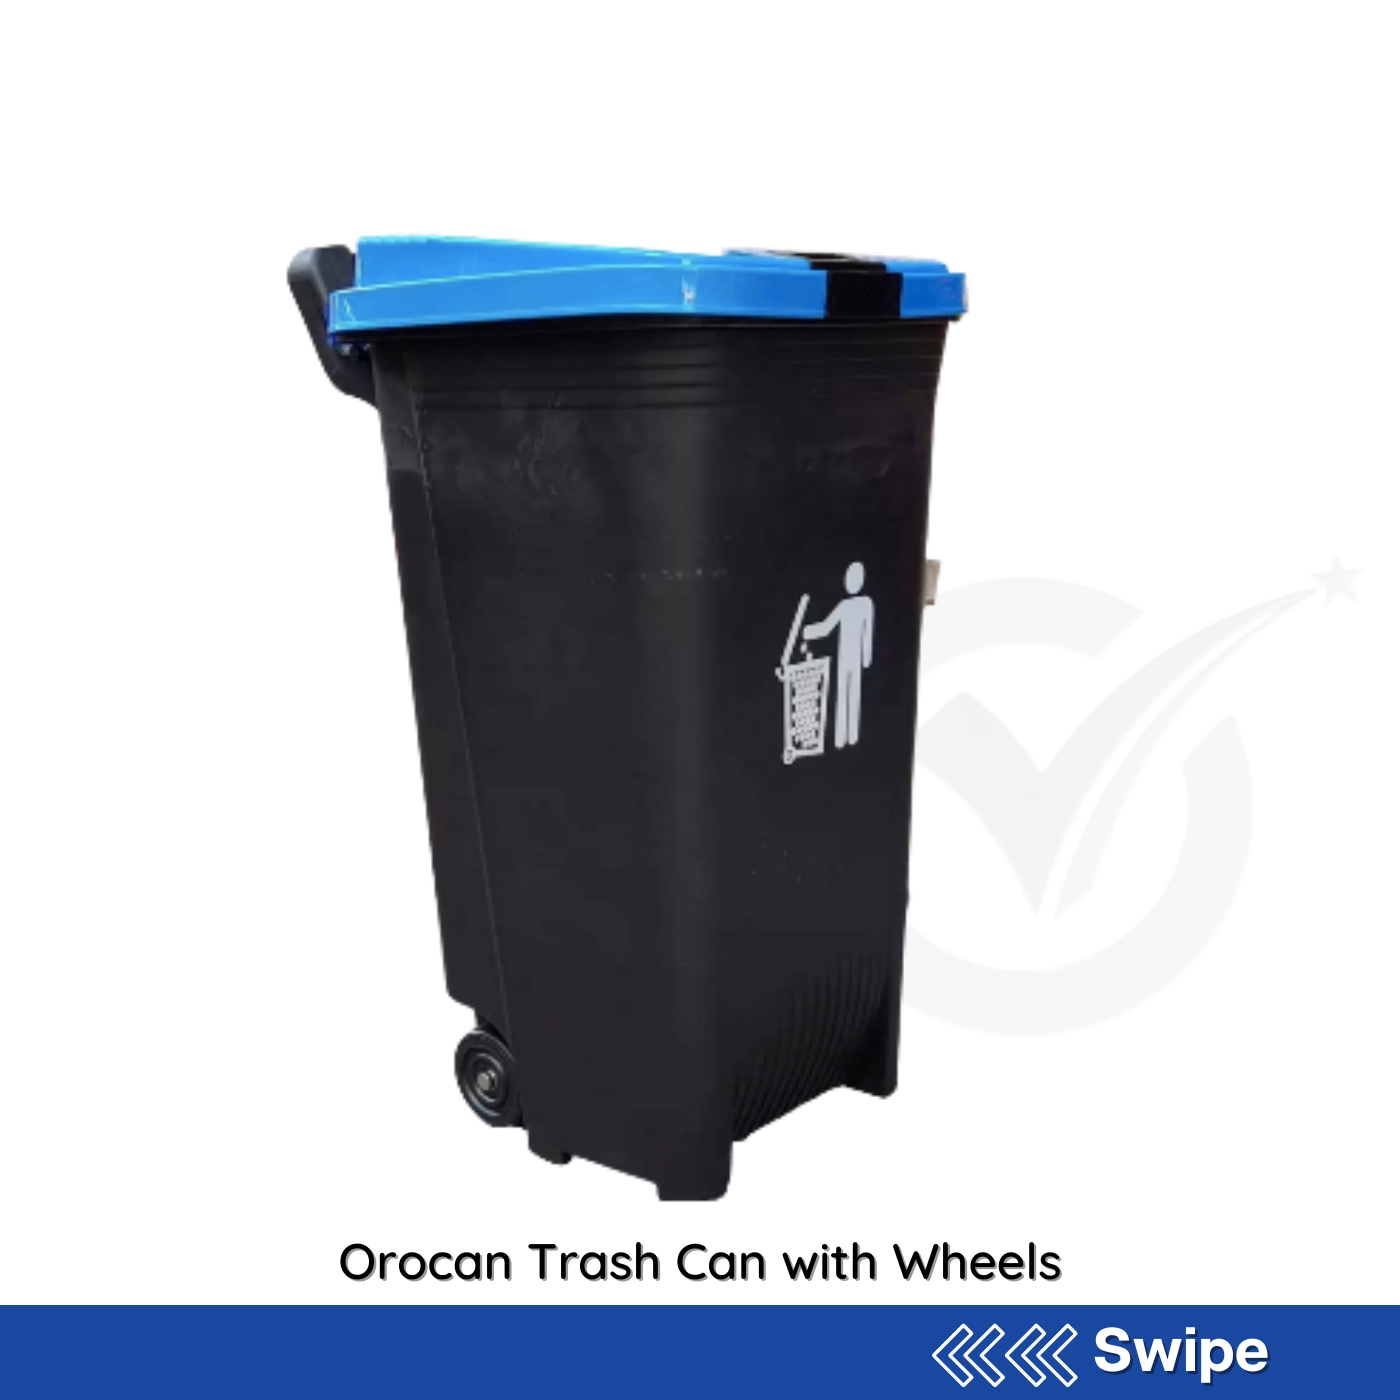 Orocan Trash Can with Wheels